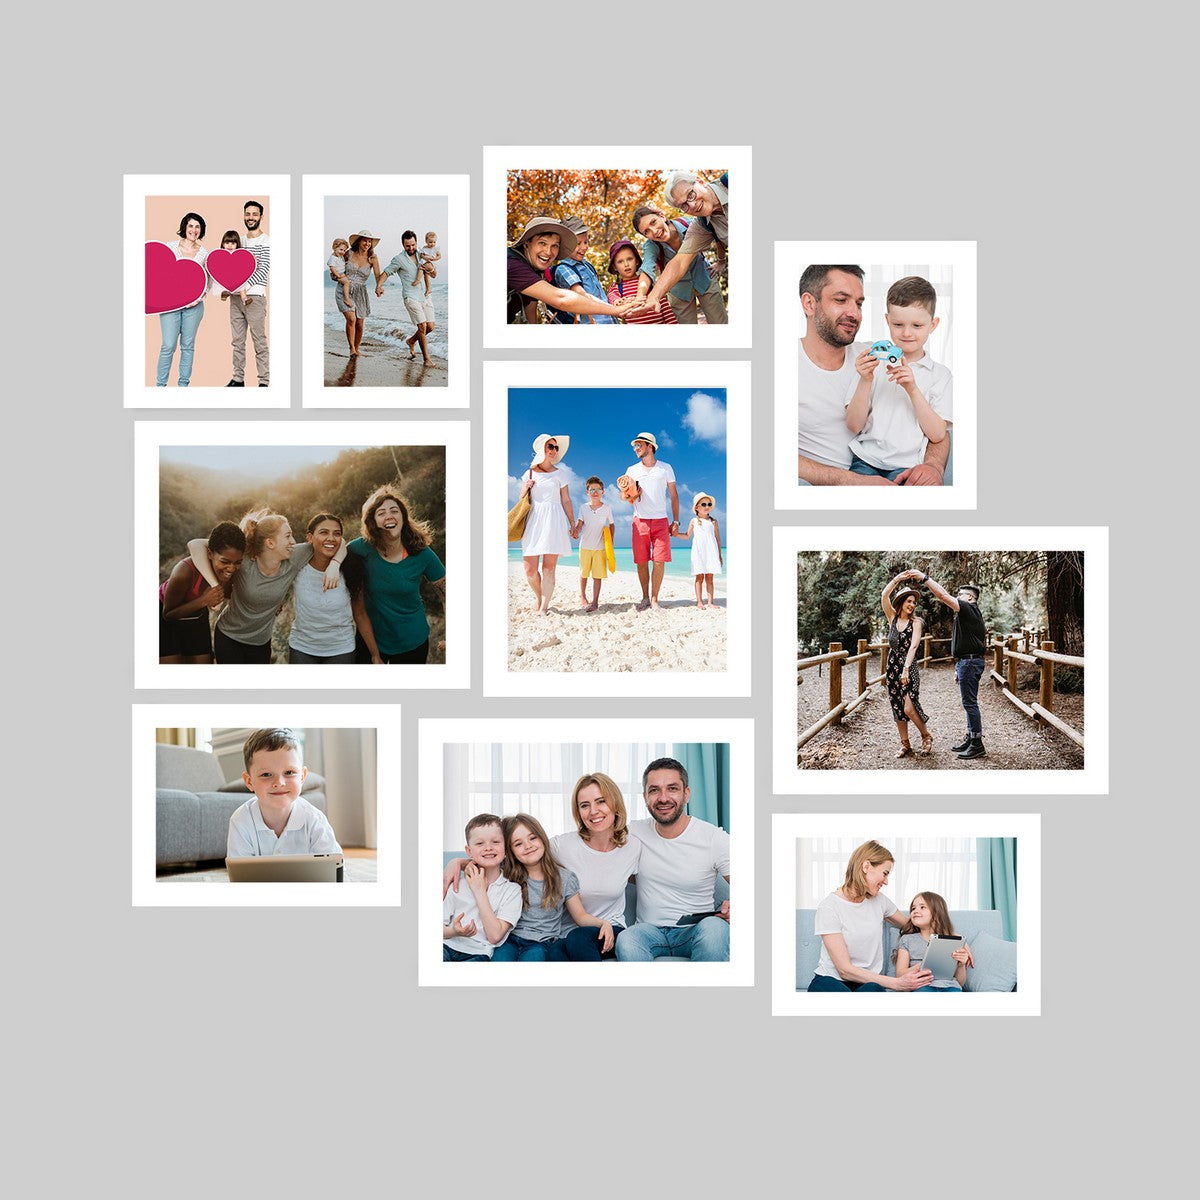 Memory Wall Collage Photo Frame - Set of 10 Photo Frames for 2 Photos of 5"x7", 4 Photos of 6"x8" and 4 Photos of 8"x10"